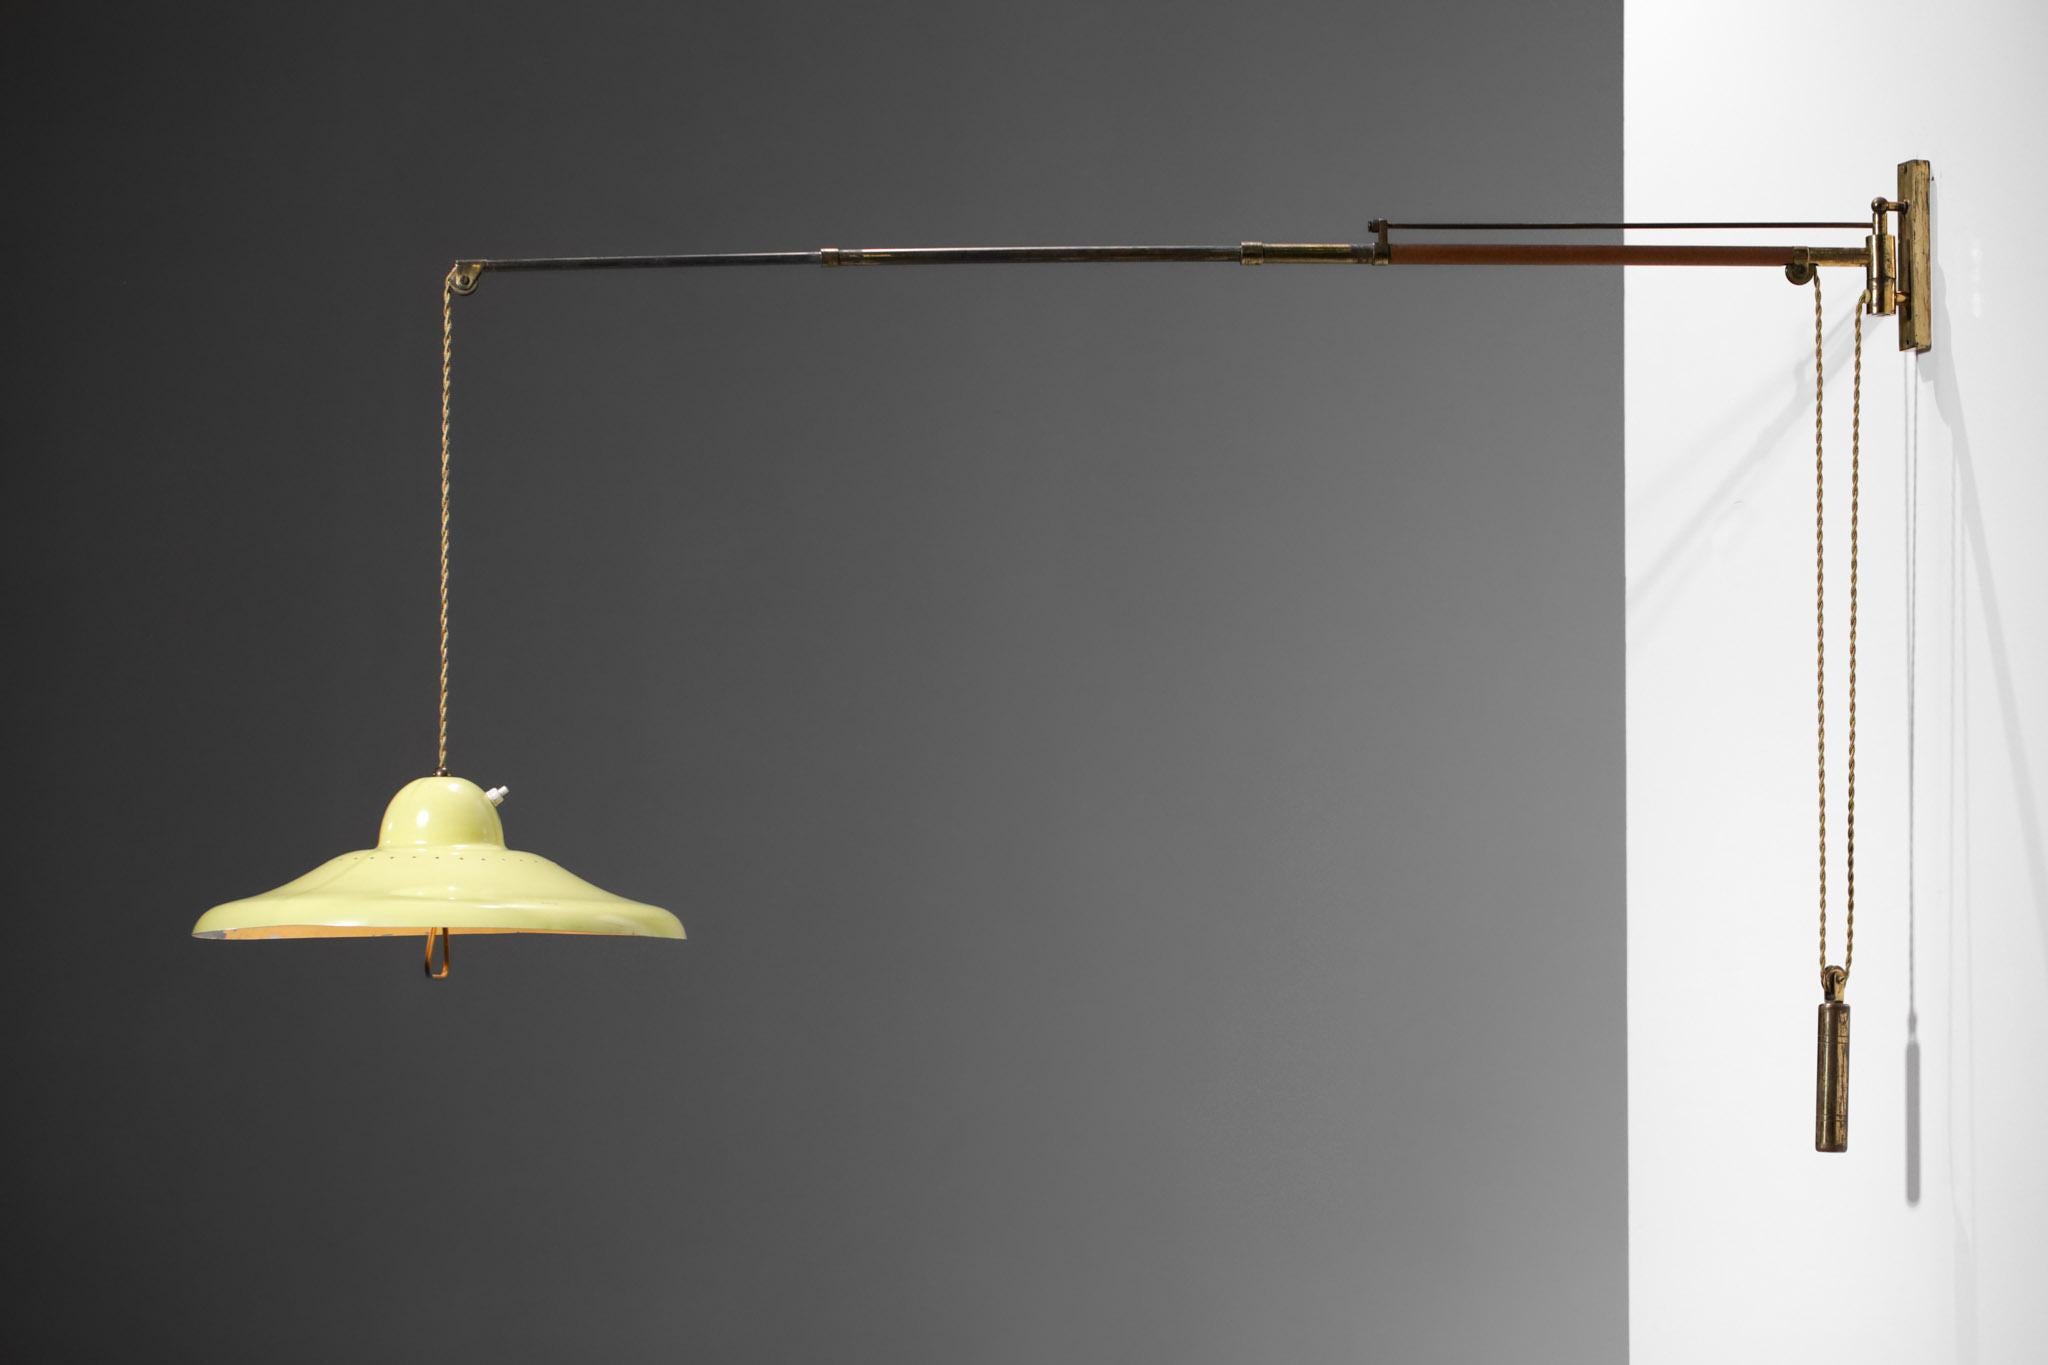 Italian telescopic wall light from the 1950s in the style of Arredoluce's work. Structure and counterweight in brass, shade in yellow lacquered steel. Counterweight and pulley to modulate the height of the lampshade and the length of the bracket